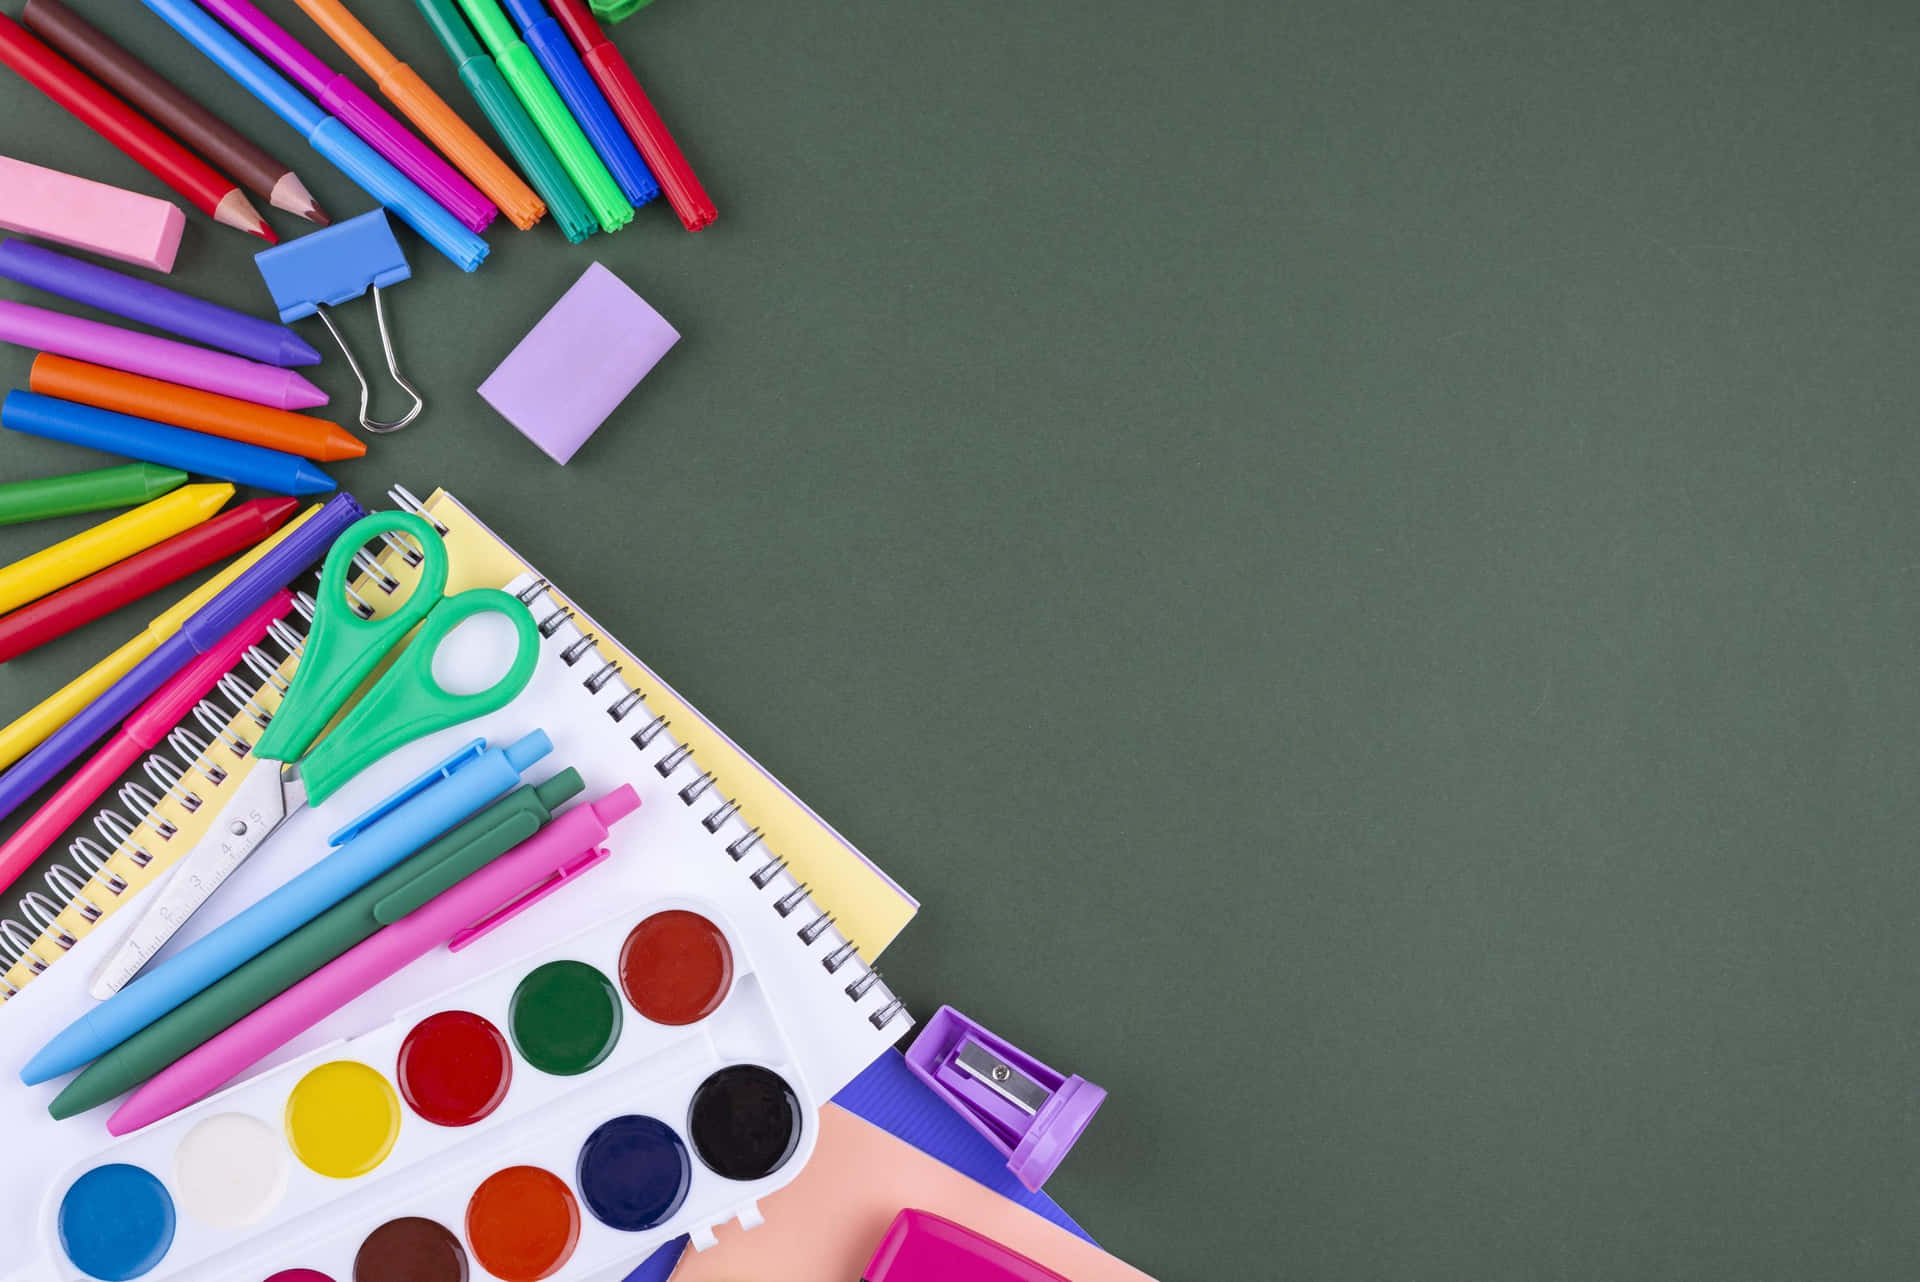 Colorful School Supplies On A Black Background